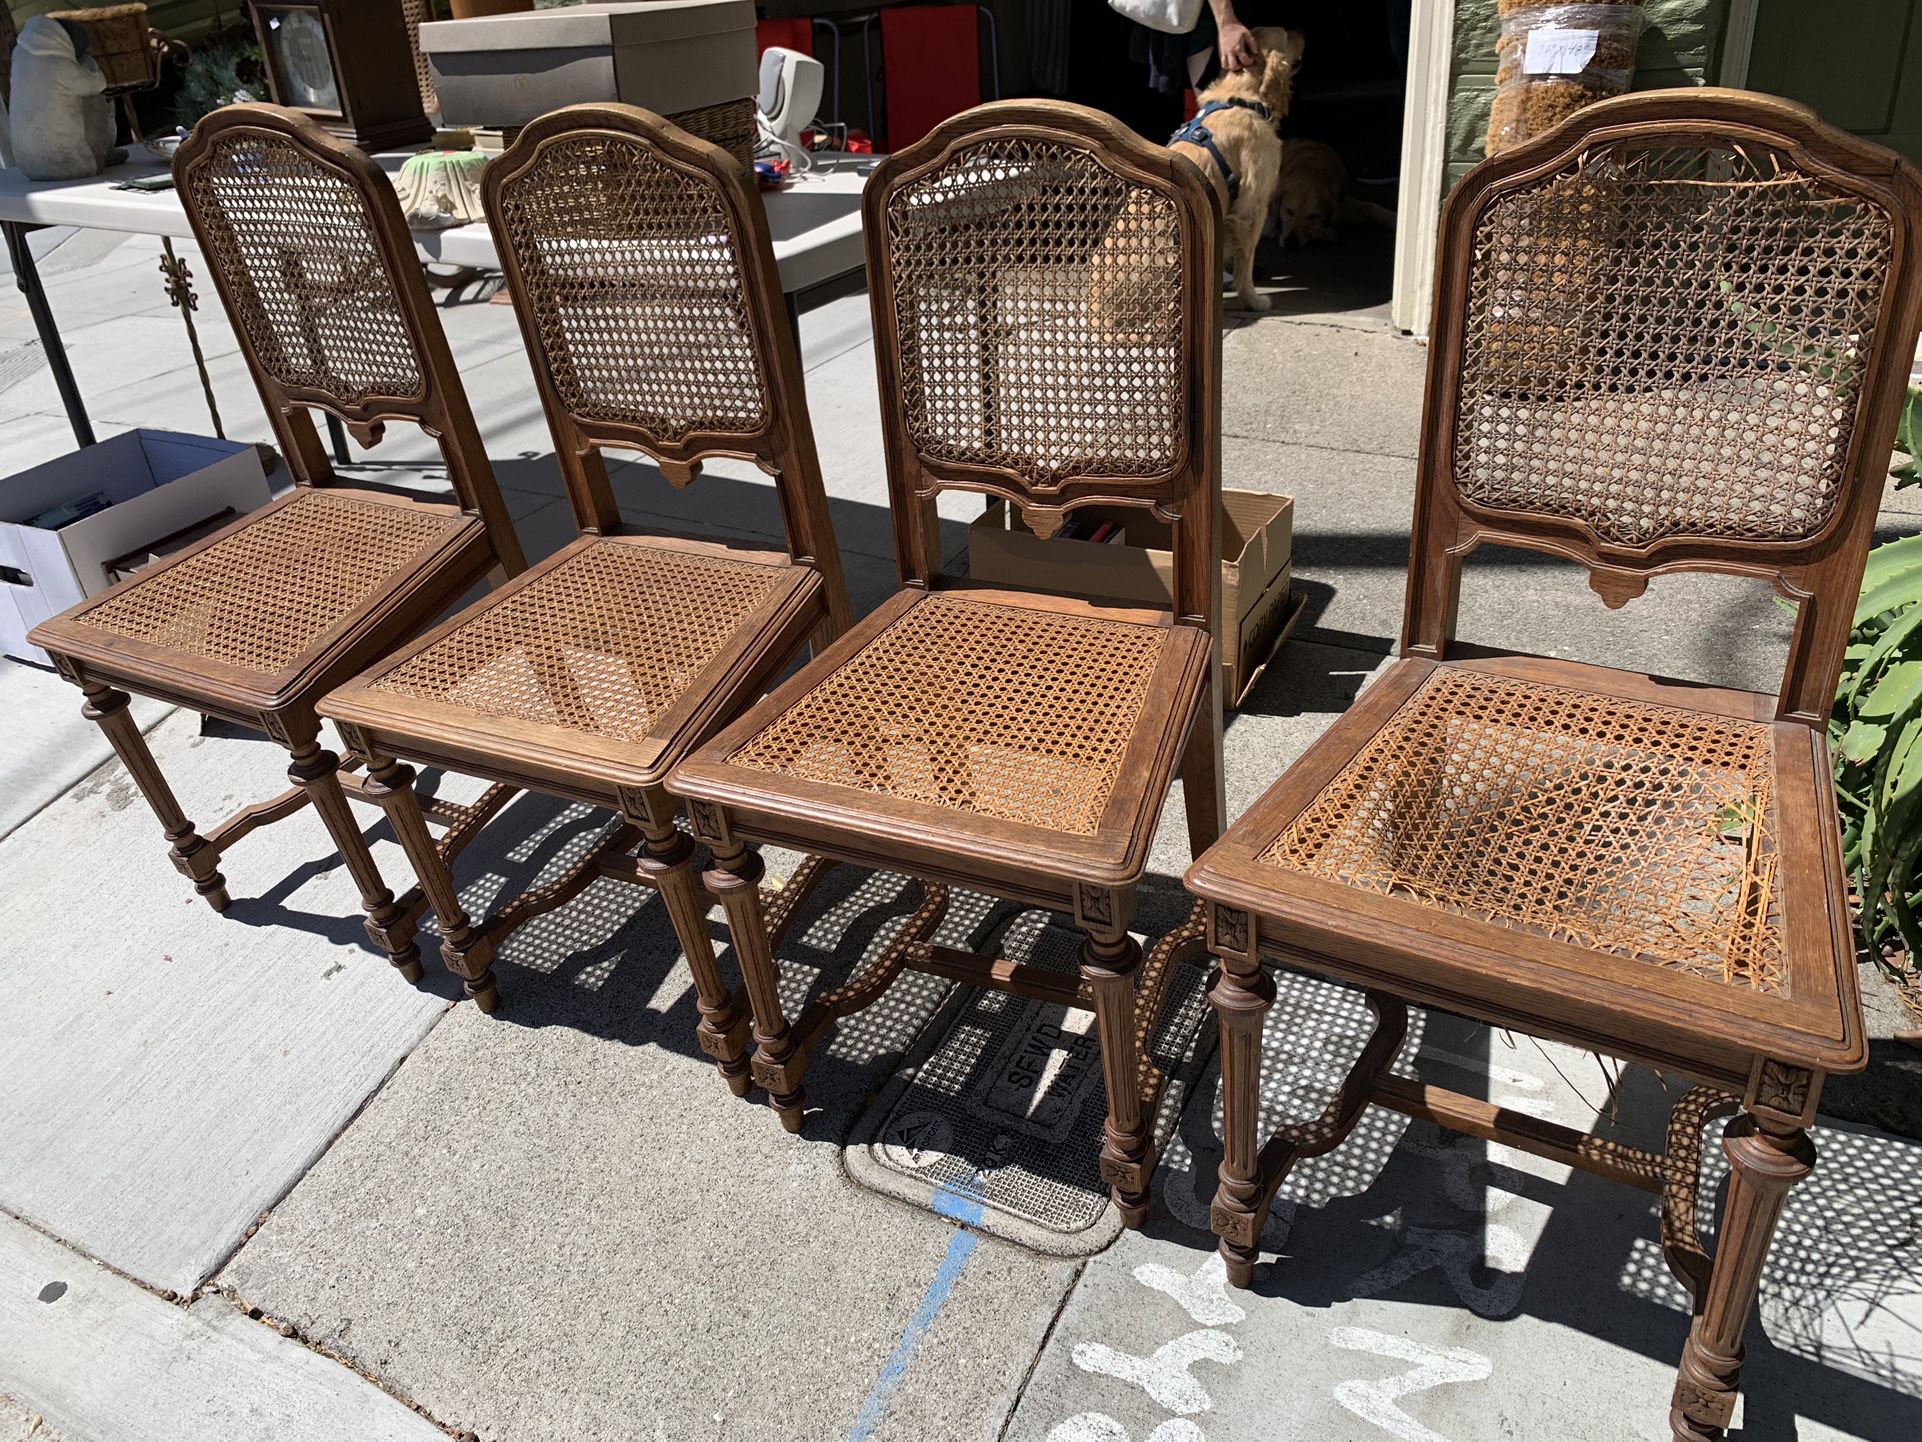 4 Antique Oak And Caned Chairs $100 Set